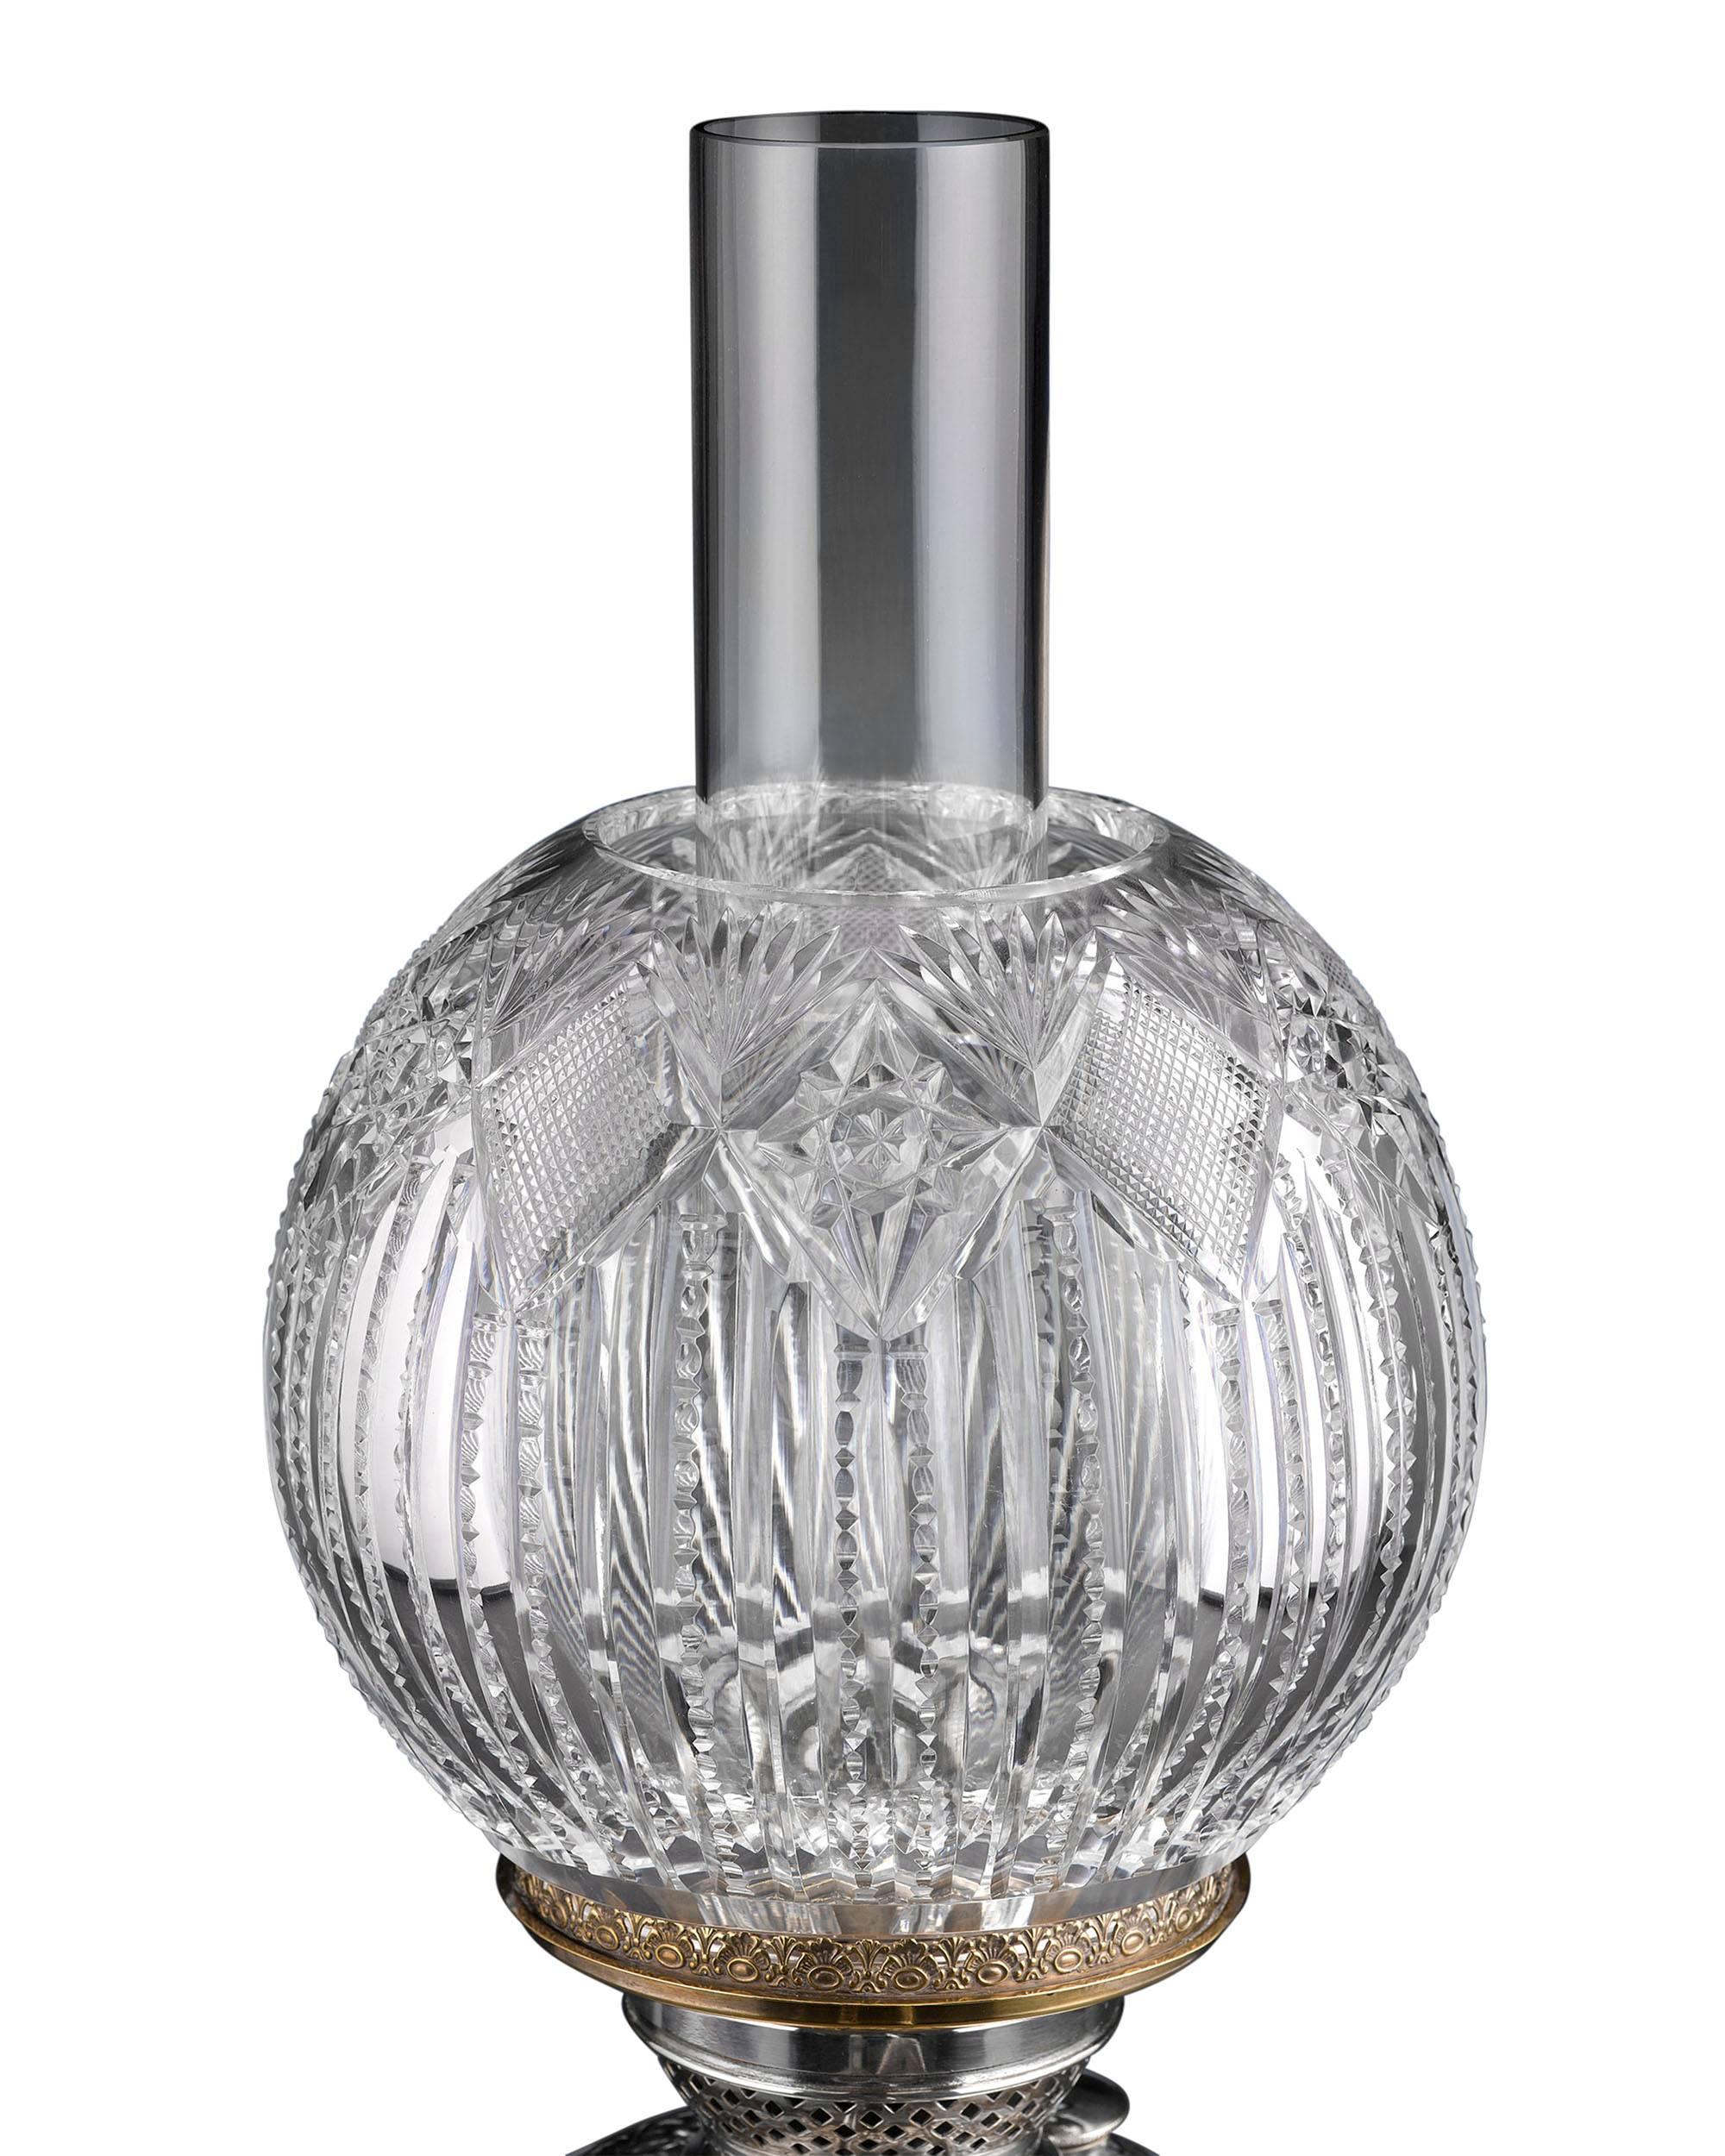 An important American Brilliant period cut-glass "Gone With the Wind" lamp. Only a handful of these extraordinary lamps were created due to the enormous expense involved in creating the various components. This lovely lamp retains its